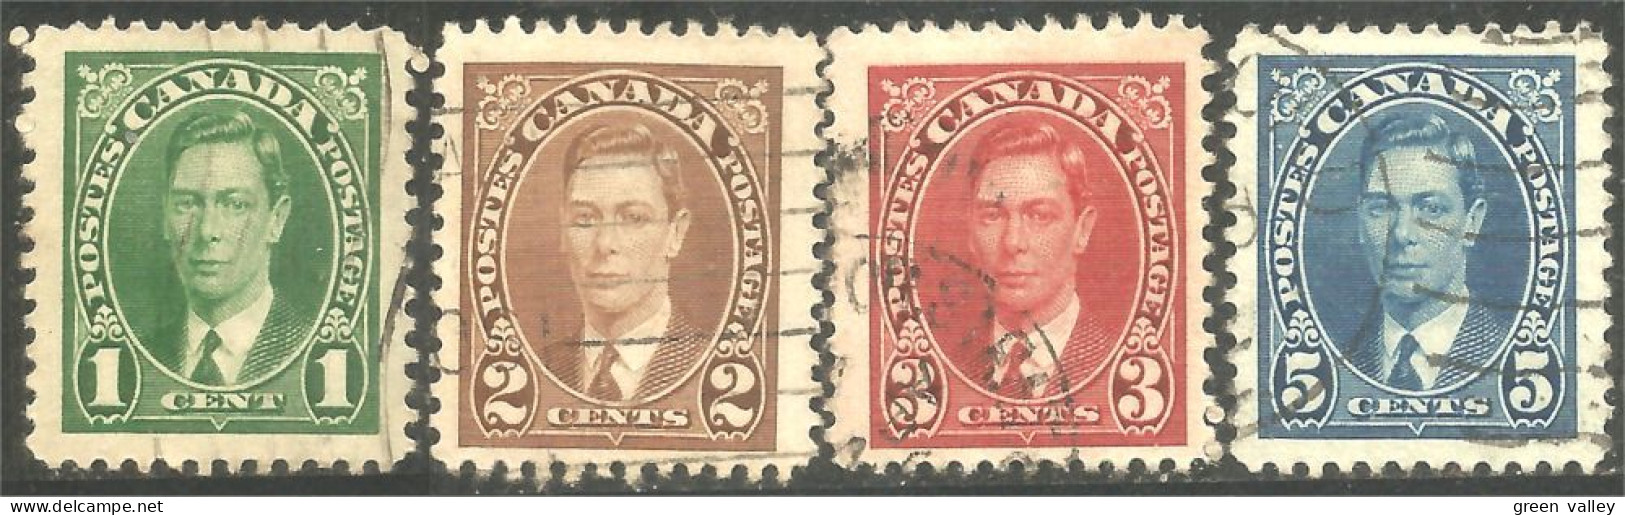 951 Canada 1937 King Roi George VI Mufti Issue 4 Timbres Stamps (484f) - Royalties, Royals